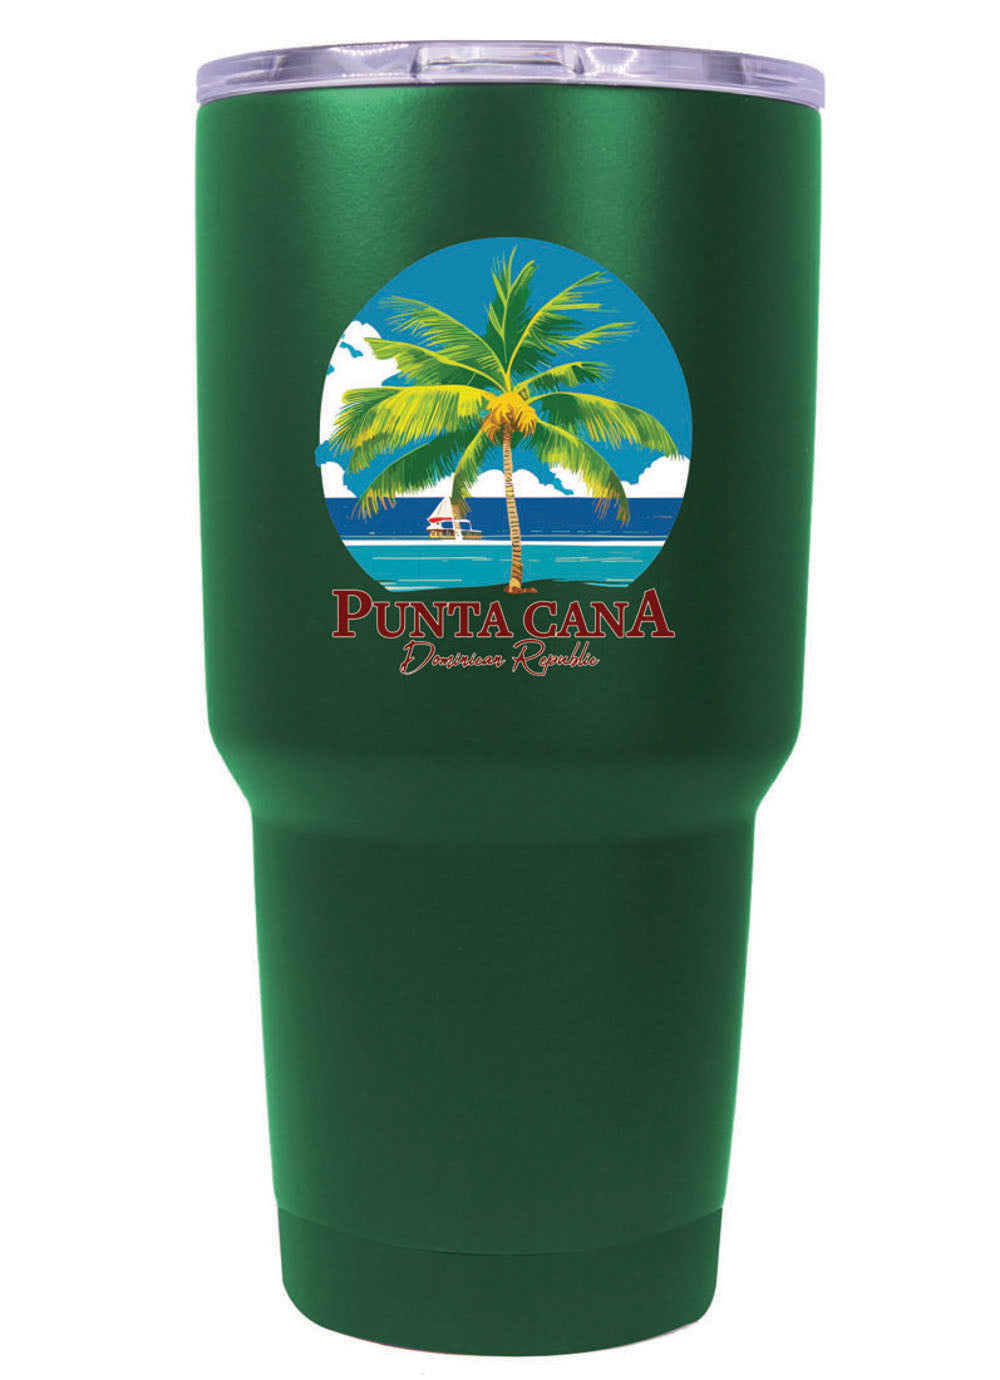 Punta Cana Dominican Republic Souvenir 24 oz Insulated Stainless Steel Tumbler